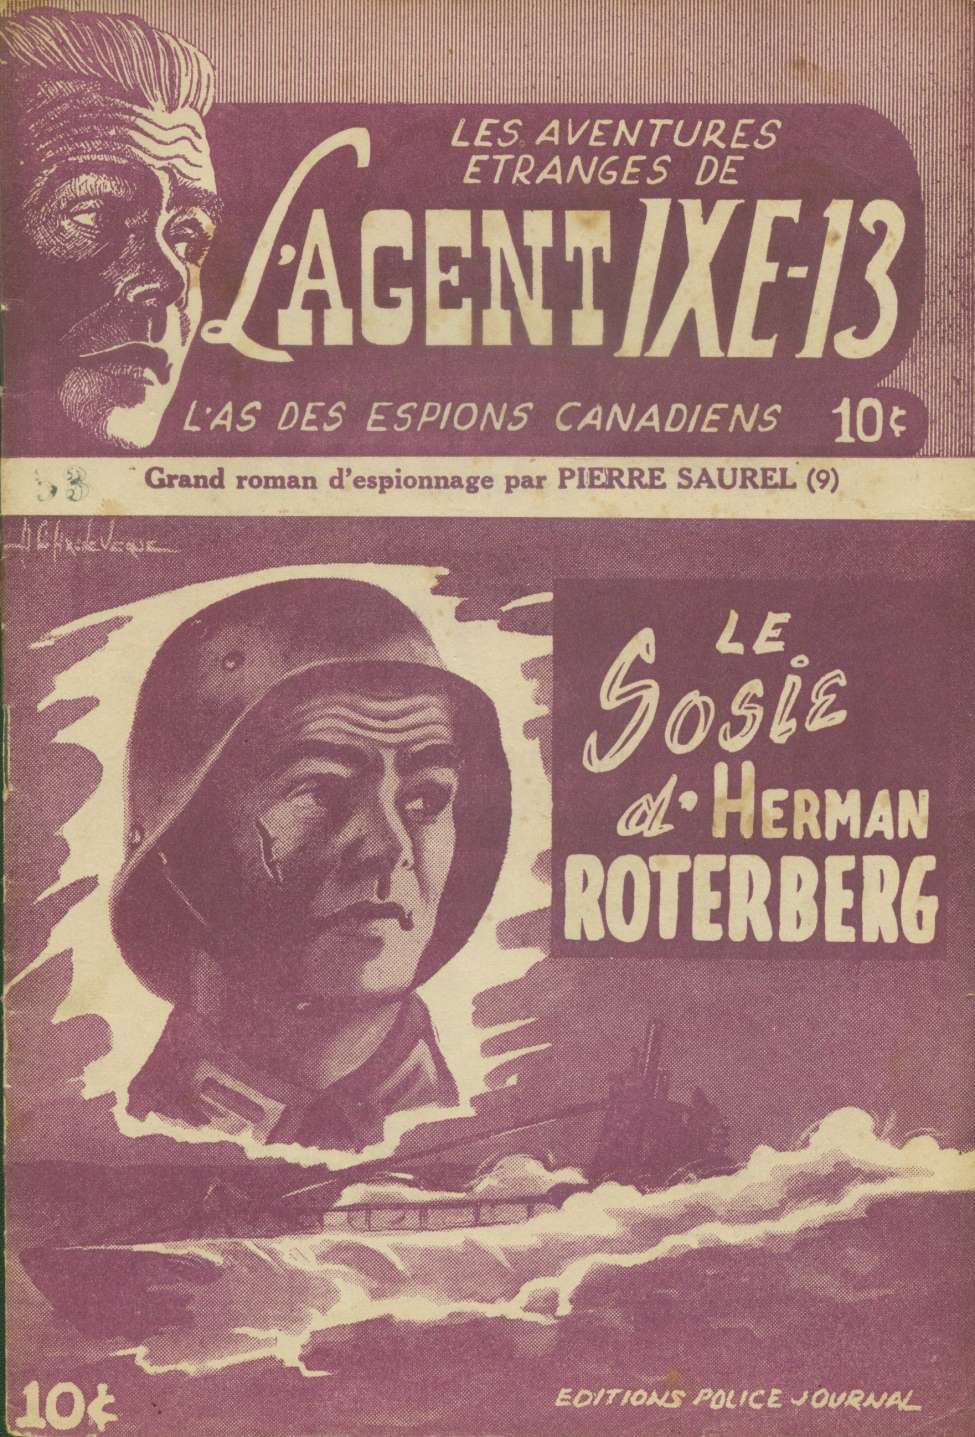 Comic Book Cover For L'Agent IXE-13 v2 9 – Le sosie d’Herman Roterberg